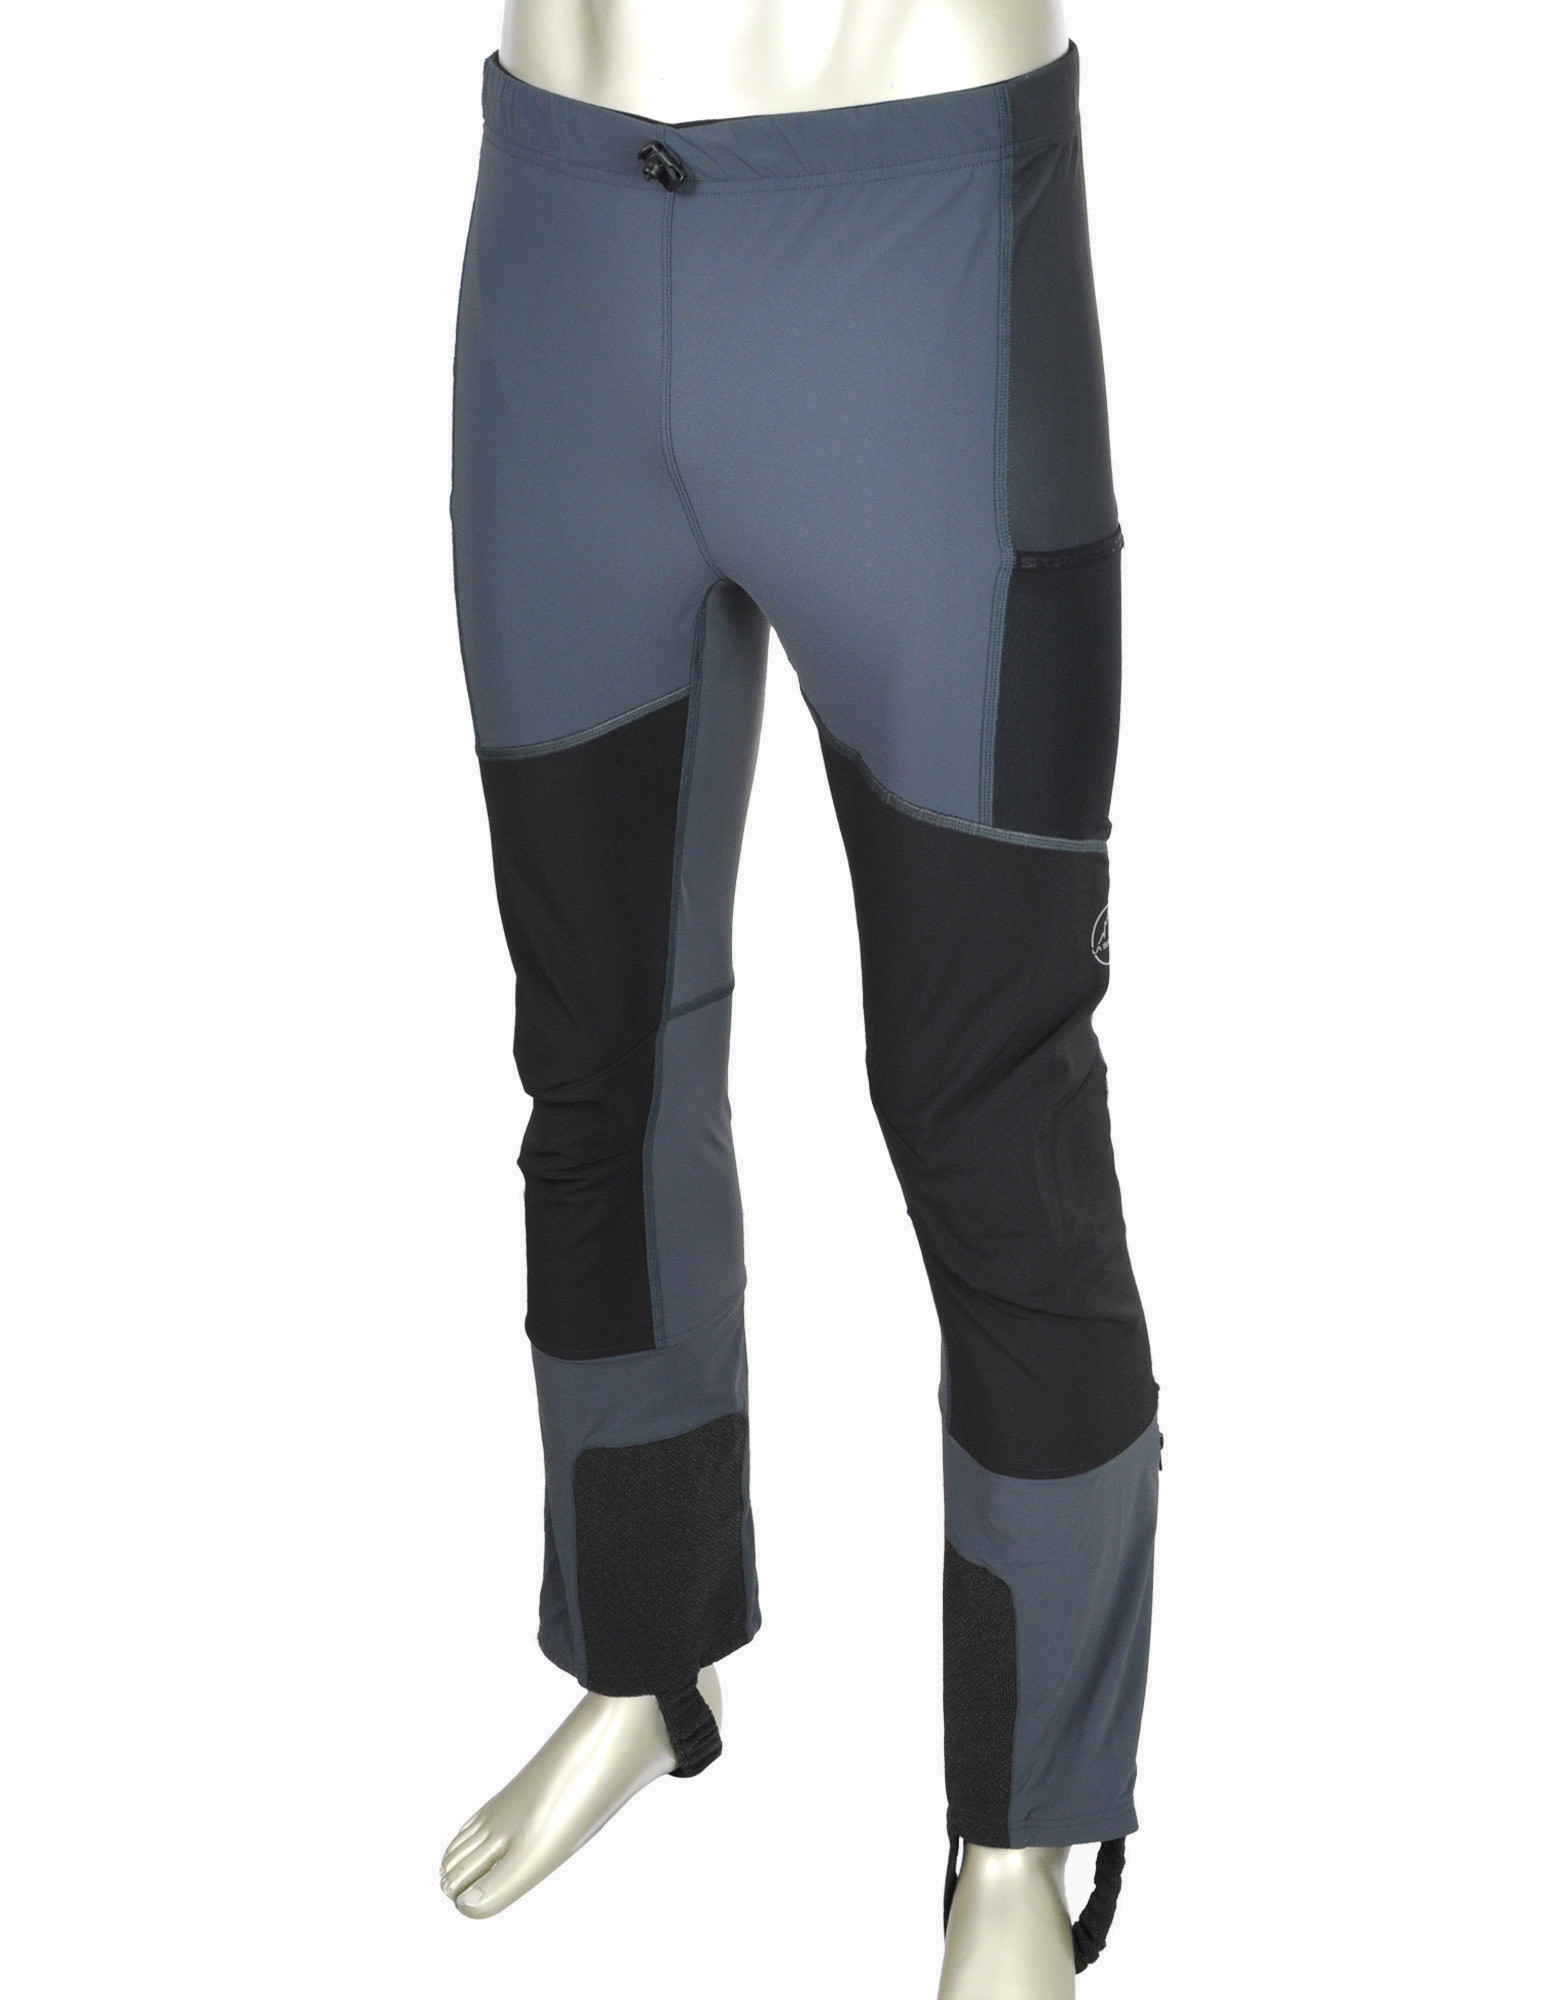 Stratos Racing Pant by LA SPORTIVA (colour: grey)